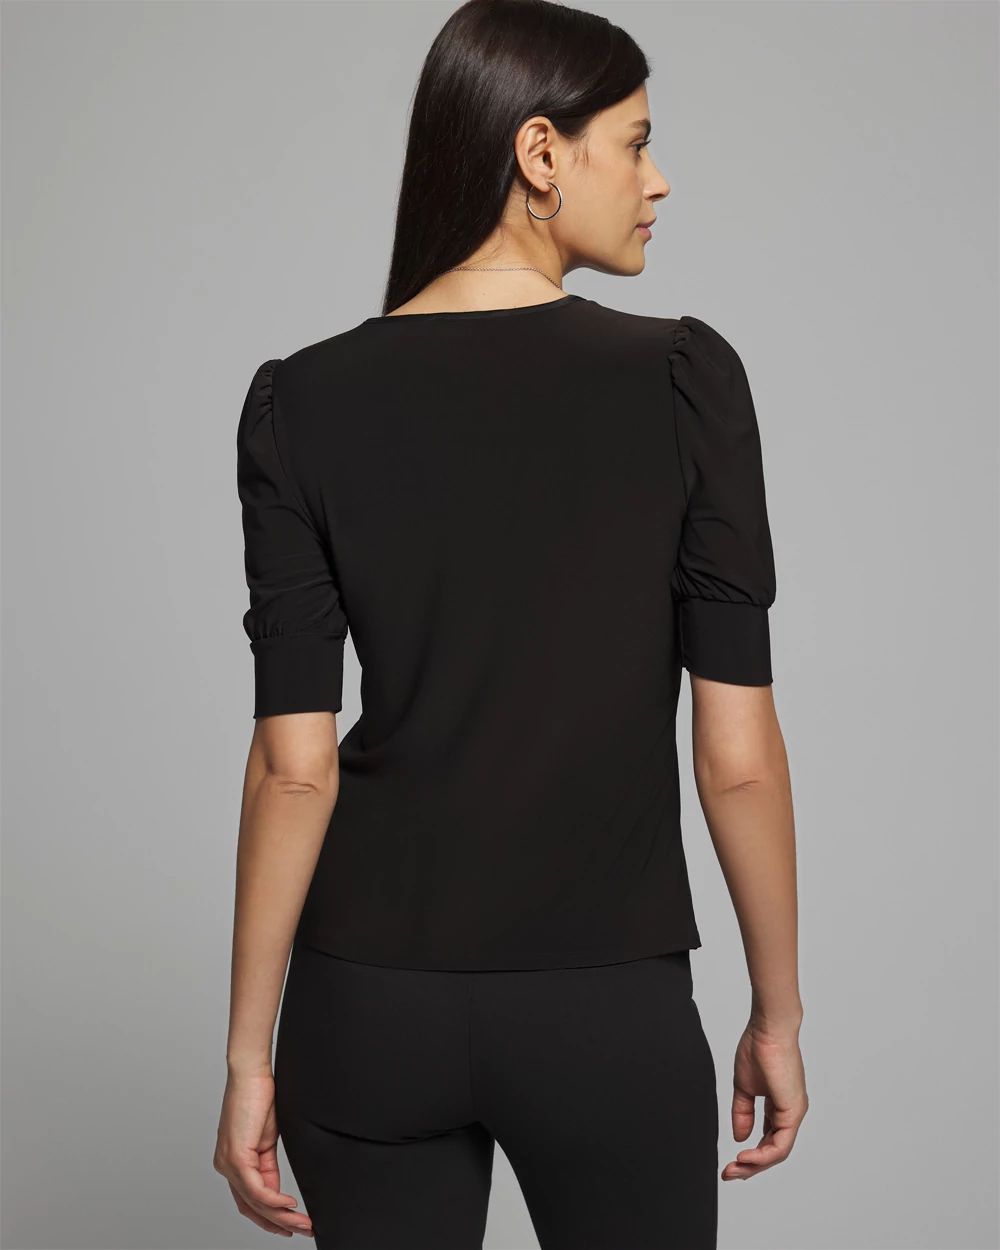 Outlet WHBM Puff Shoulder Henley Tee click to view larger image.